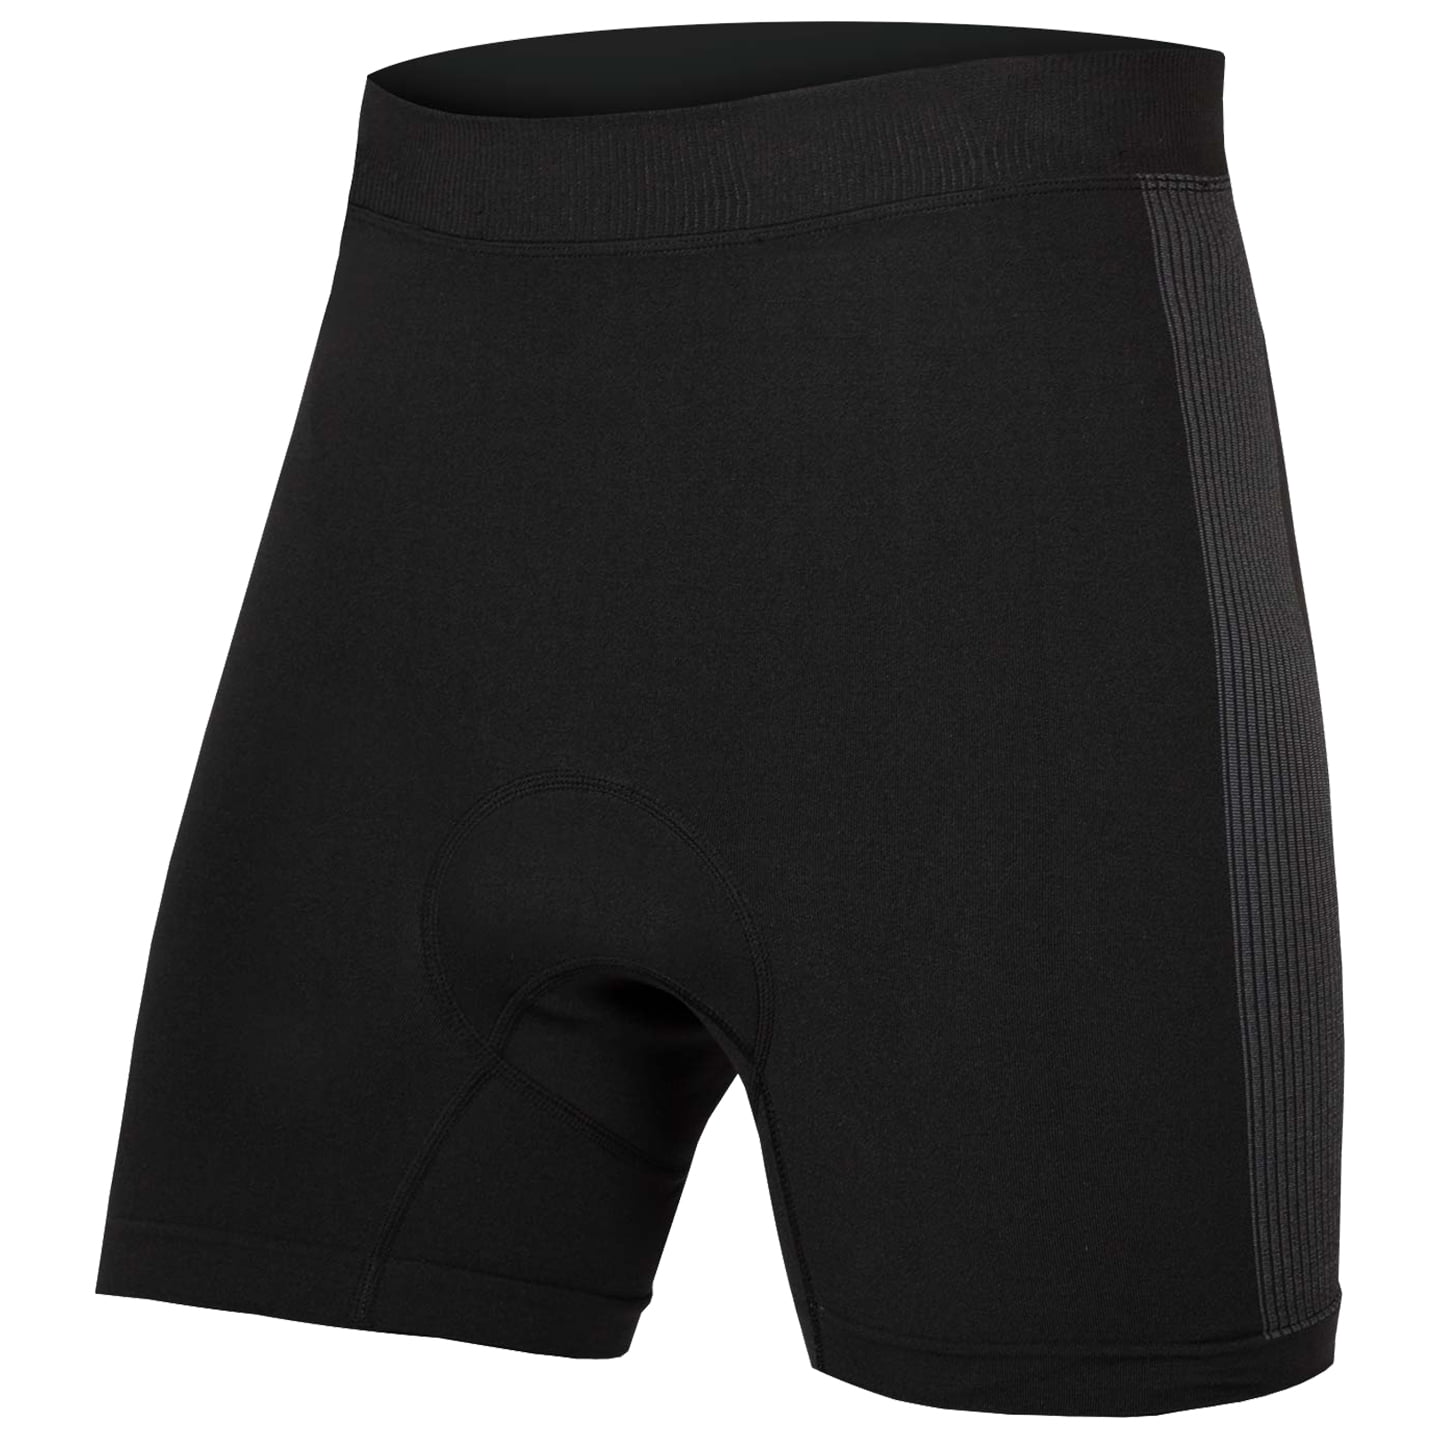 Padded Boxer Shorts, for men, size XL, Briefs, Cycling clothing